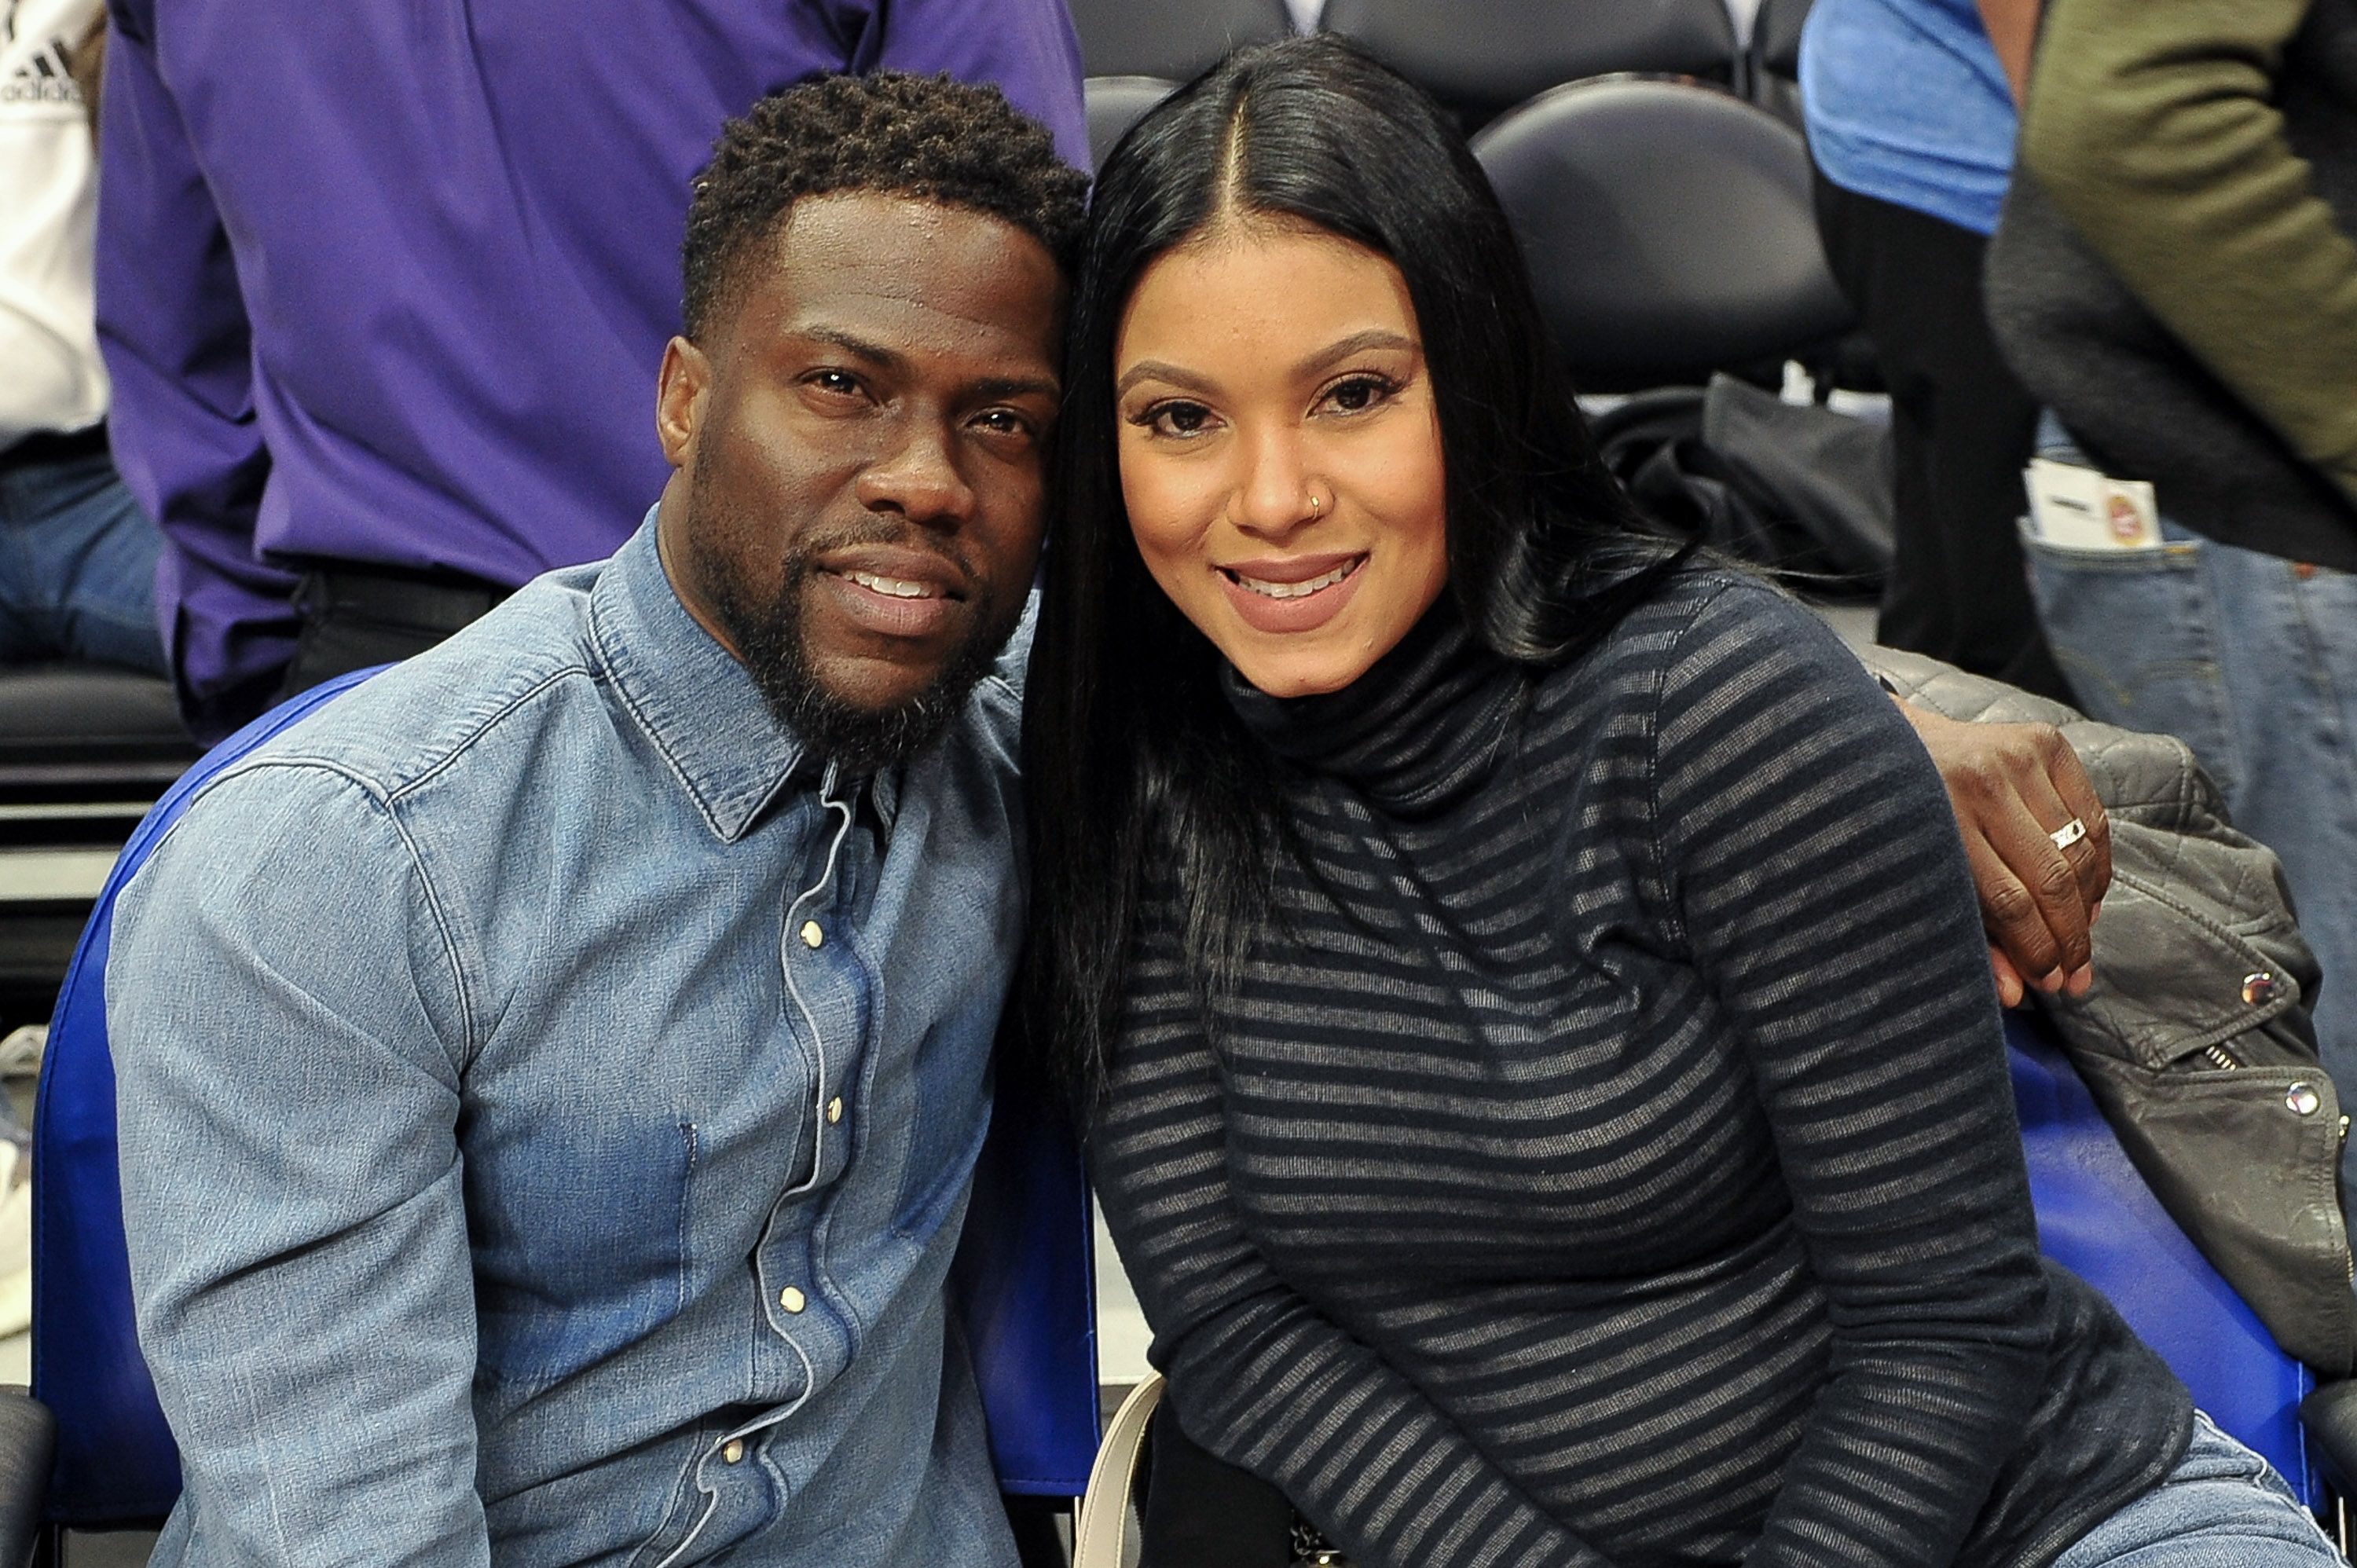 Actor Kevin Hart and Eniko Parrish at a basketball game between the Los Angeles Clippers and the Minnesota Timberwolves at Staples Center on January 22, 2018 in Los Angeles, California | Photo: Getty Images